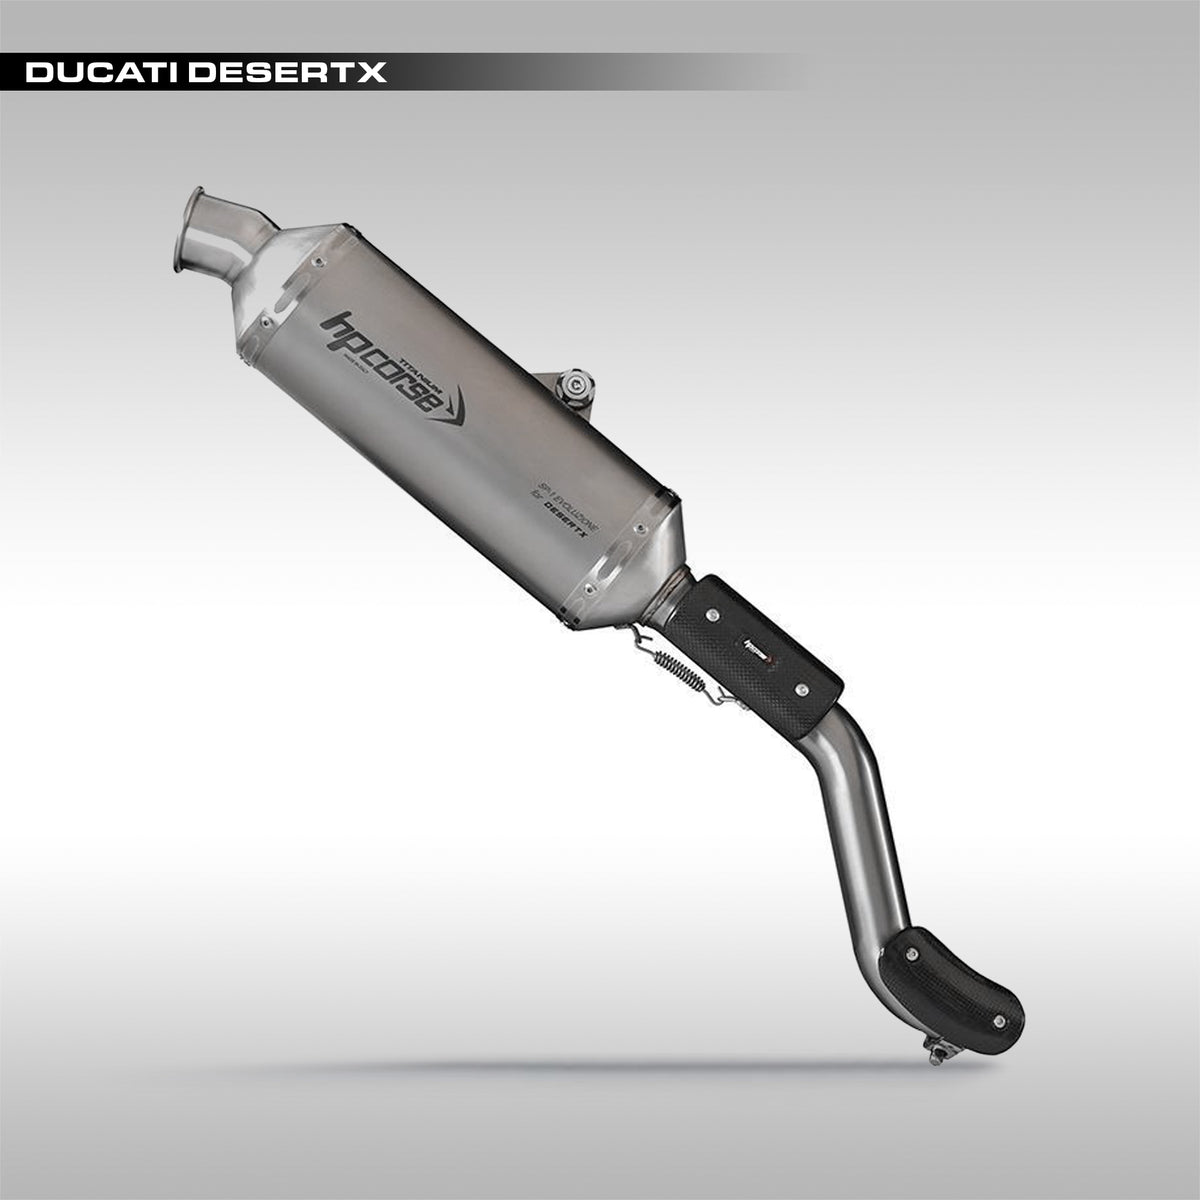 HP CORSE exhaust for the Ducati Desert X. This is the SP-1 high mount slip-on option. Hand made in Italy using Titanium for light weight, durability and great looks. 